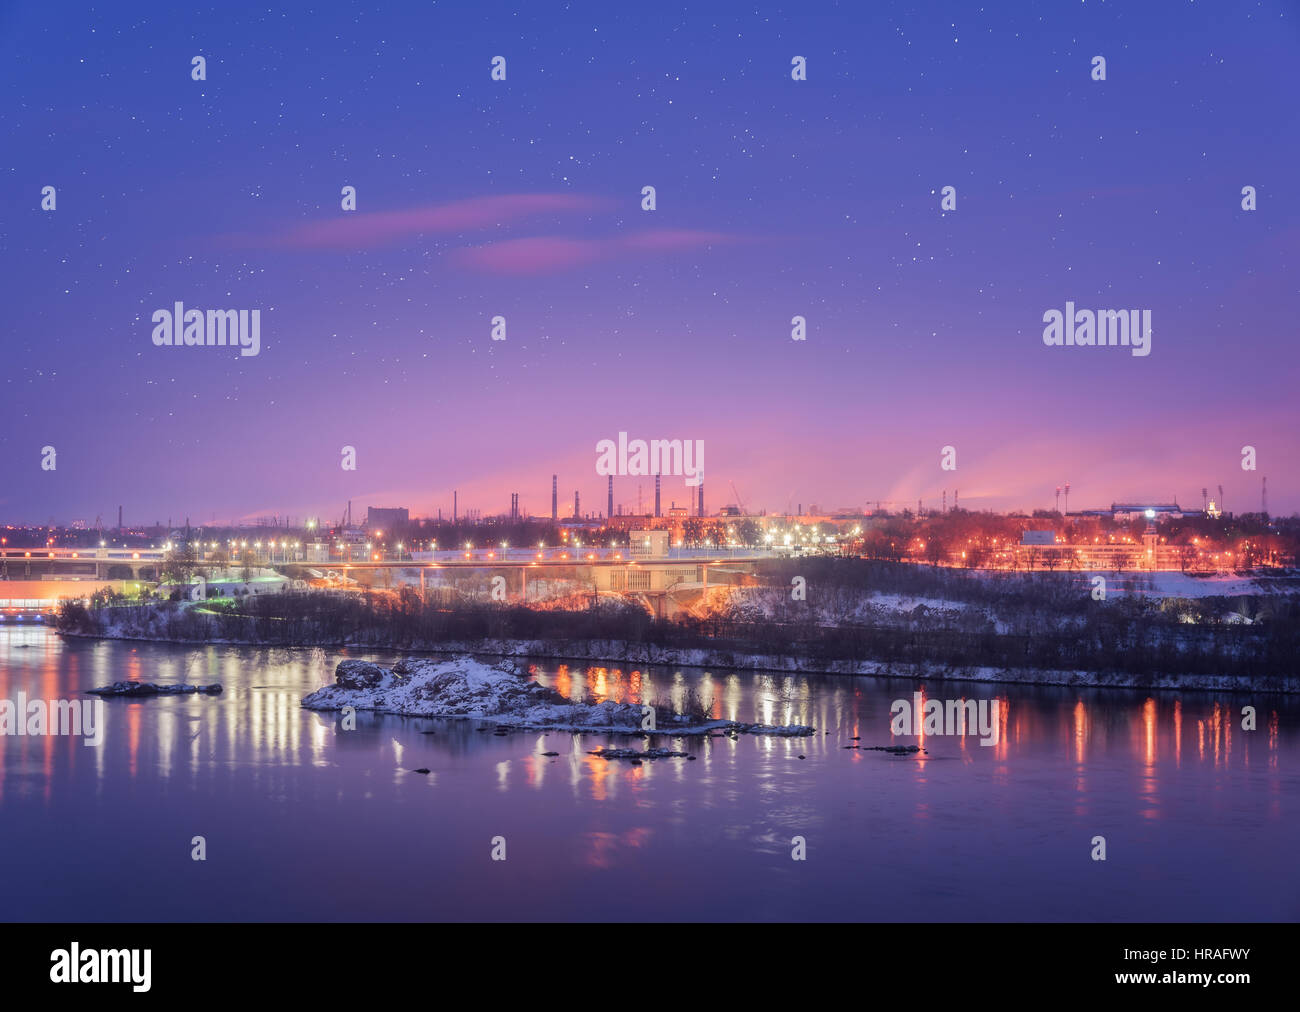 Night cityscape with colorful purple sky with stars, rocks, river, trees, buildings, city illumination and steel factory with smokestack in winter Stock Photo